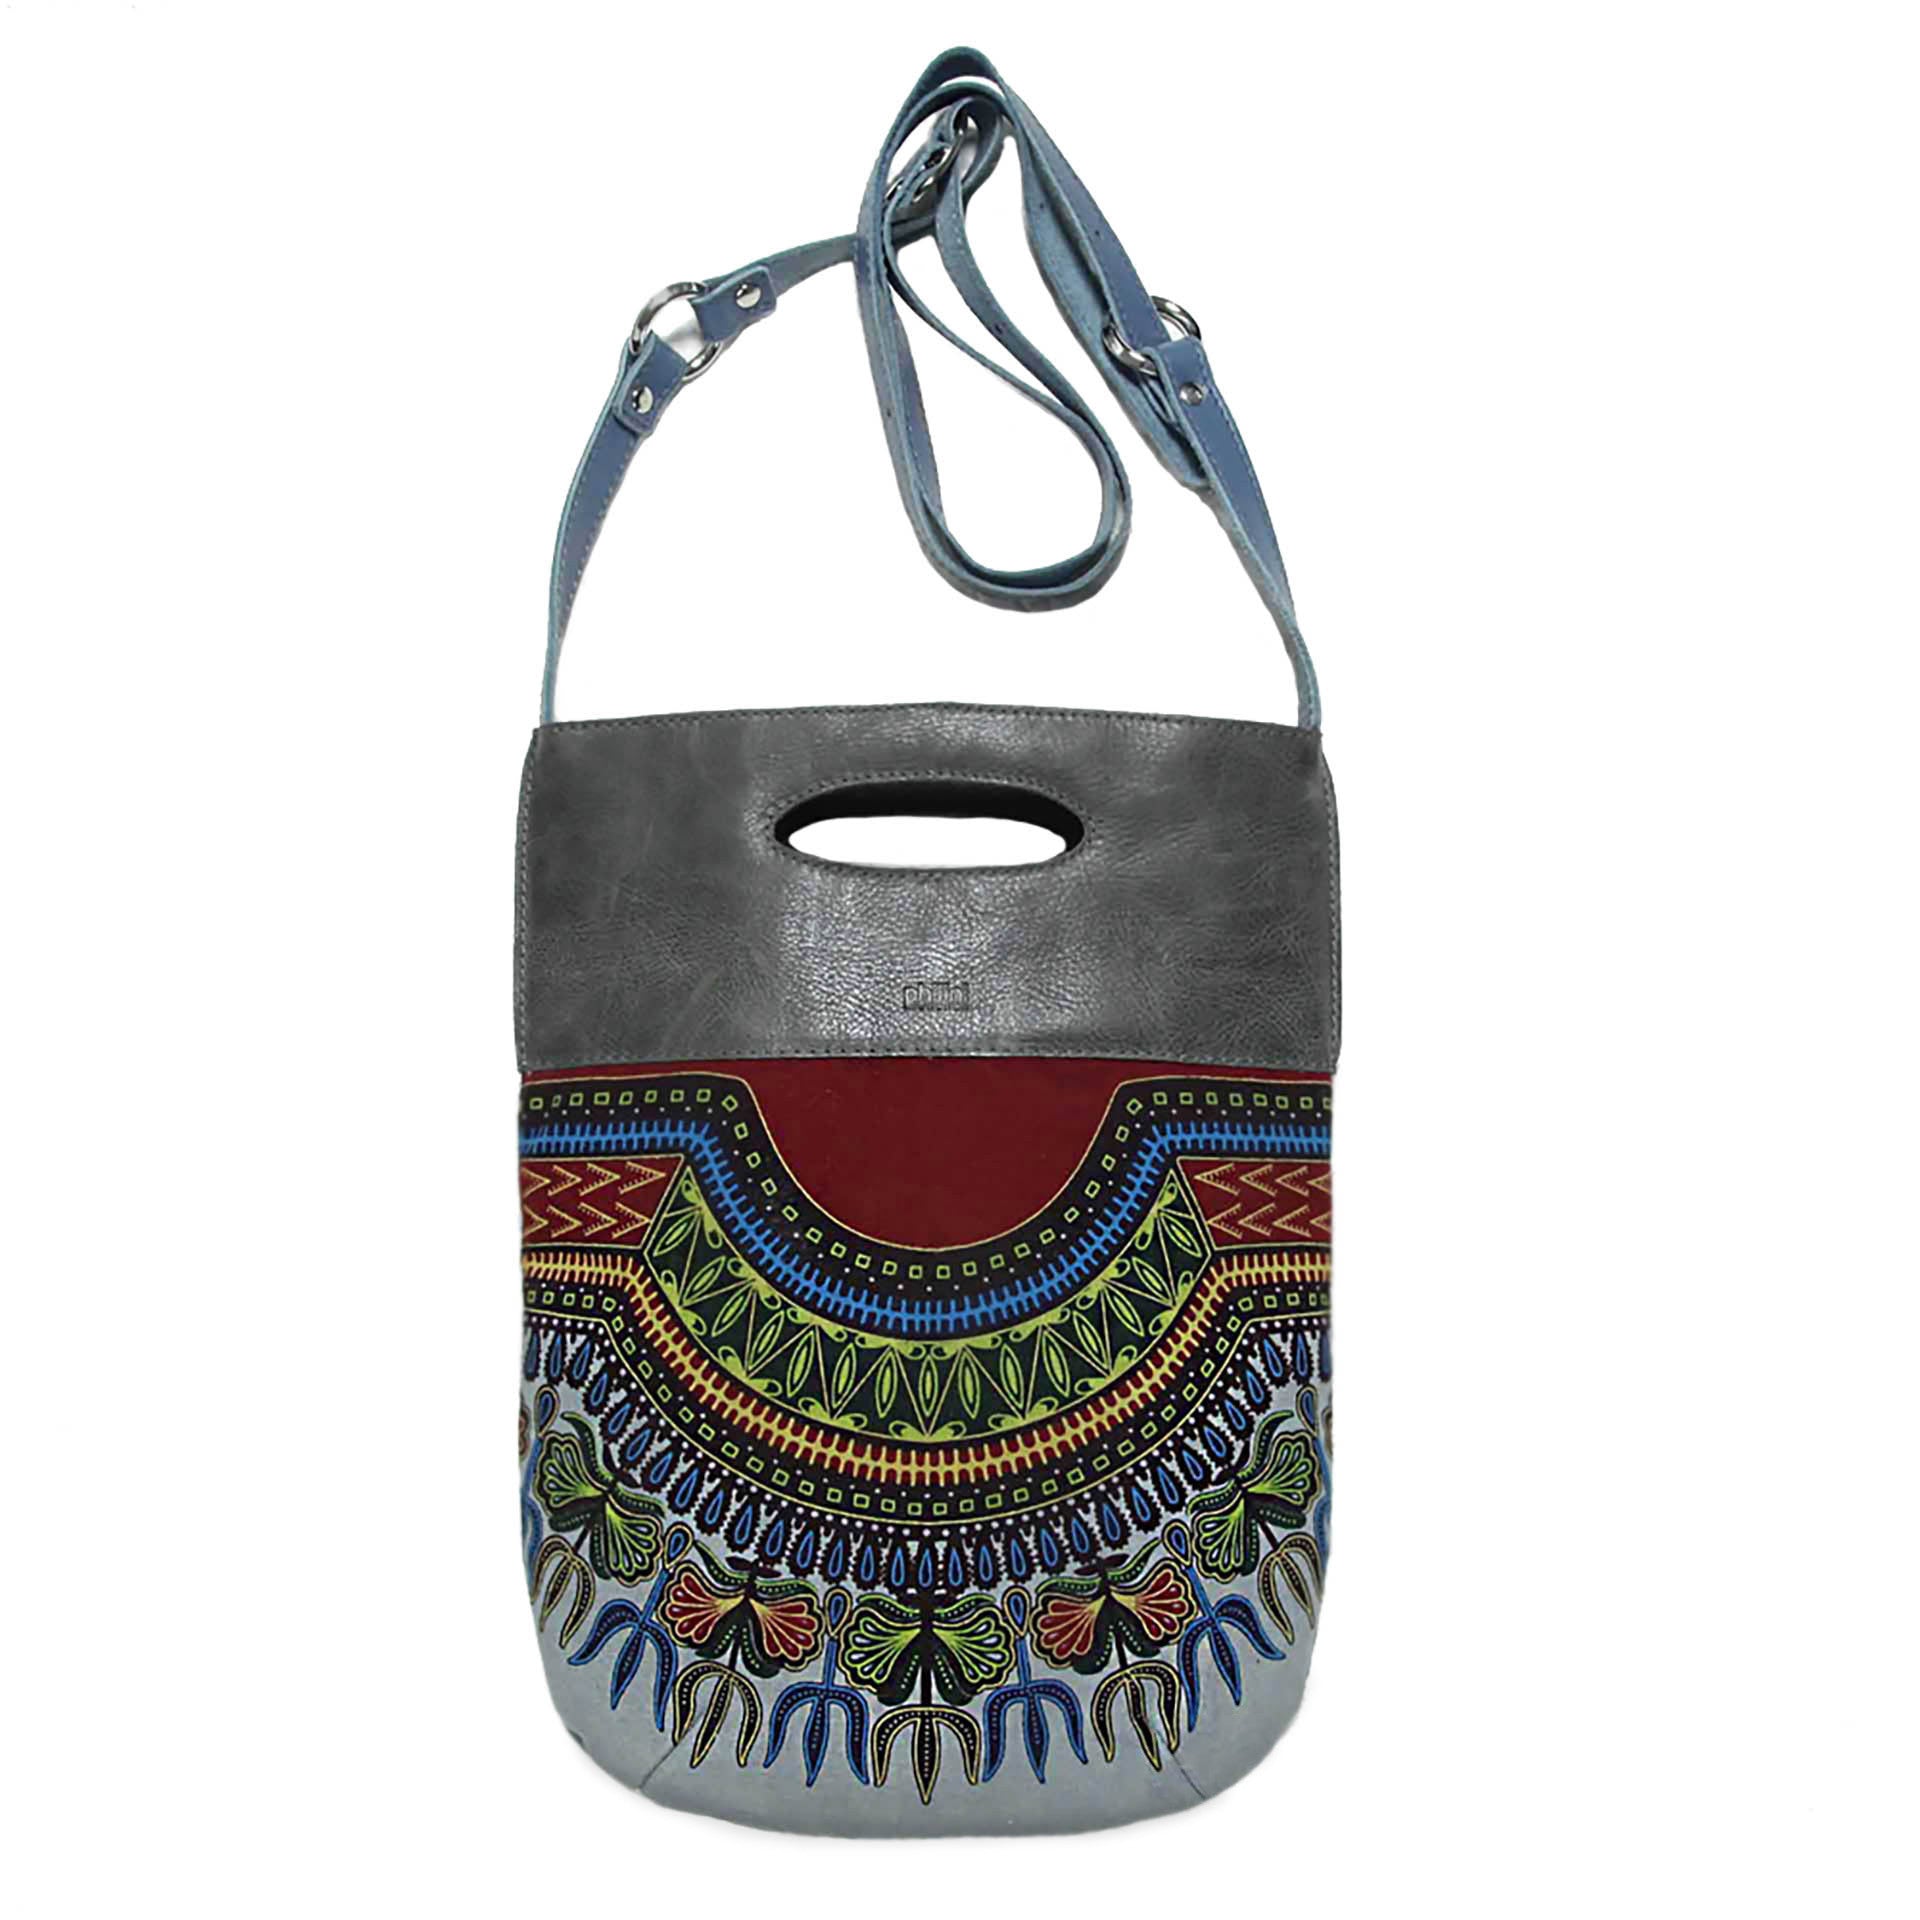 Cool Bag. Stylish and very fresh bag Ina from Summer collections of Philini. A highlight of any outfit. 